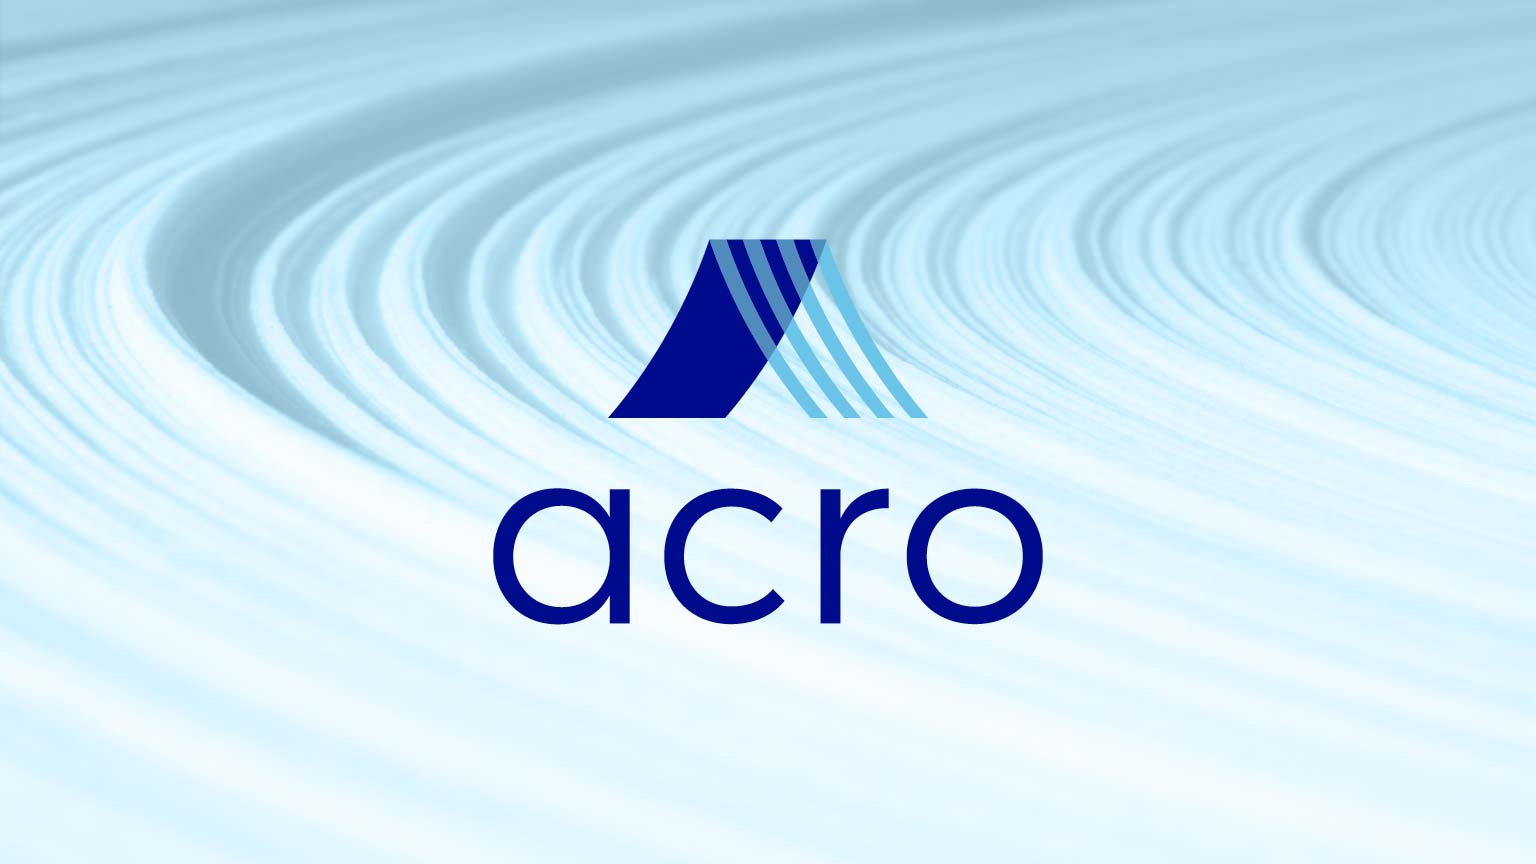 The Acro logo over a roll of paper.